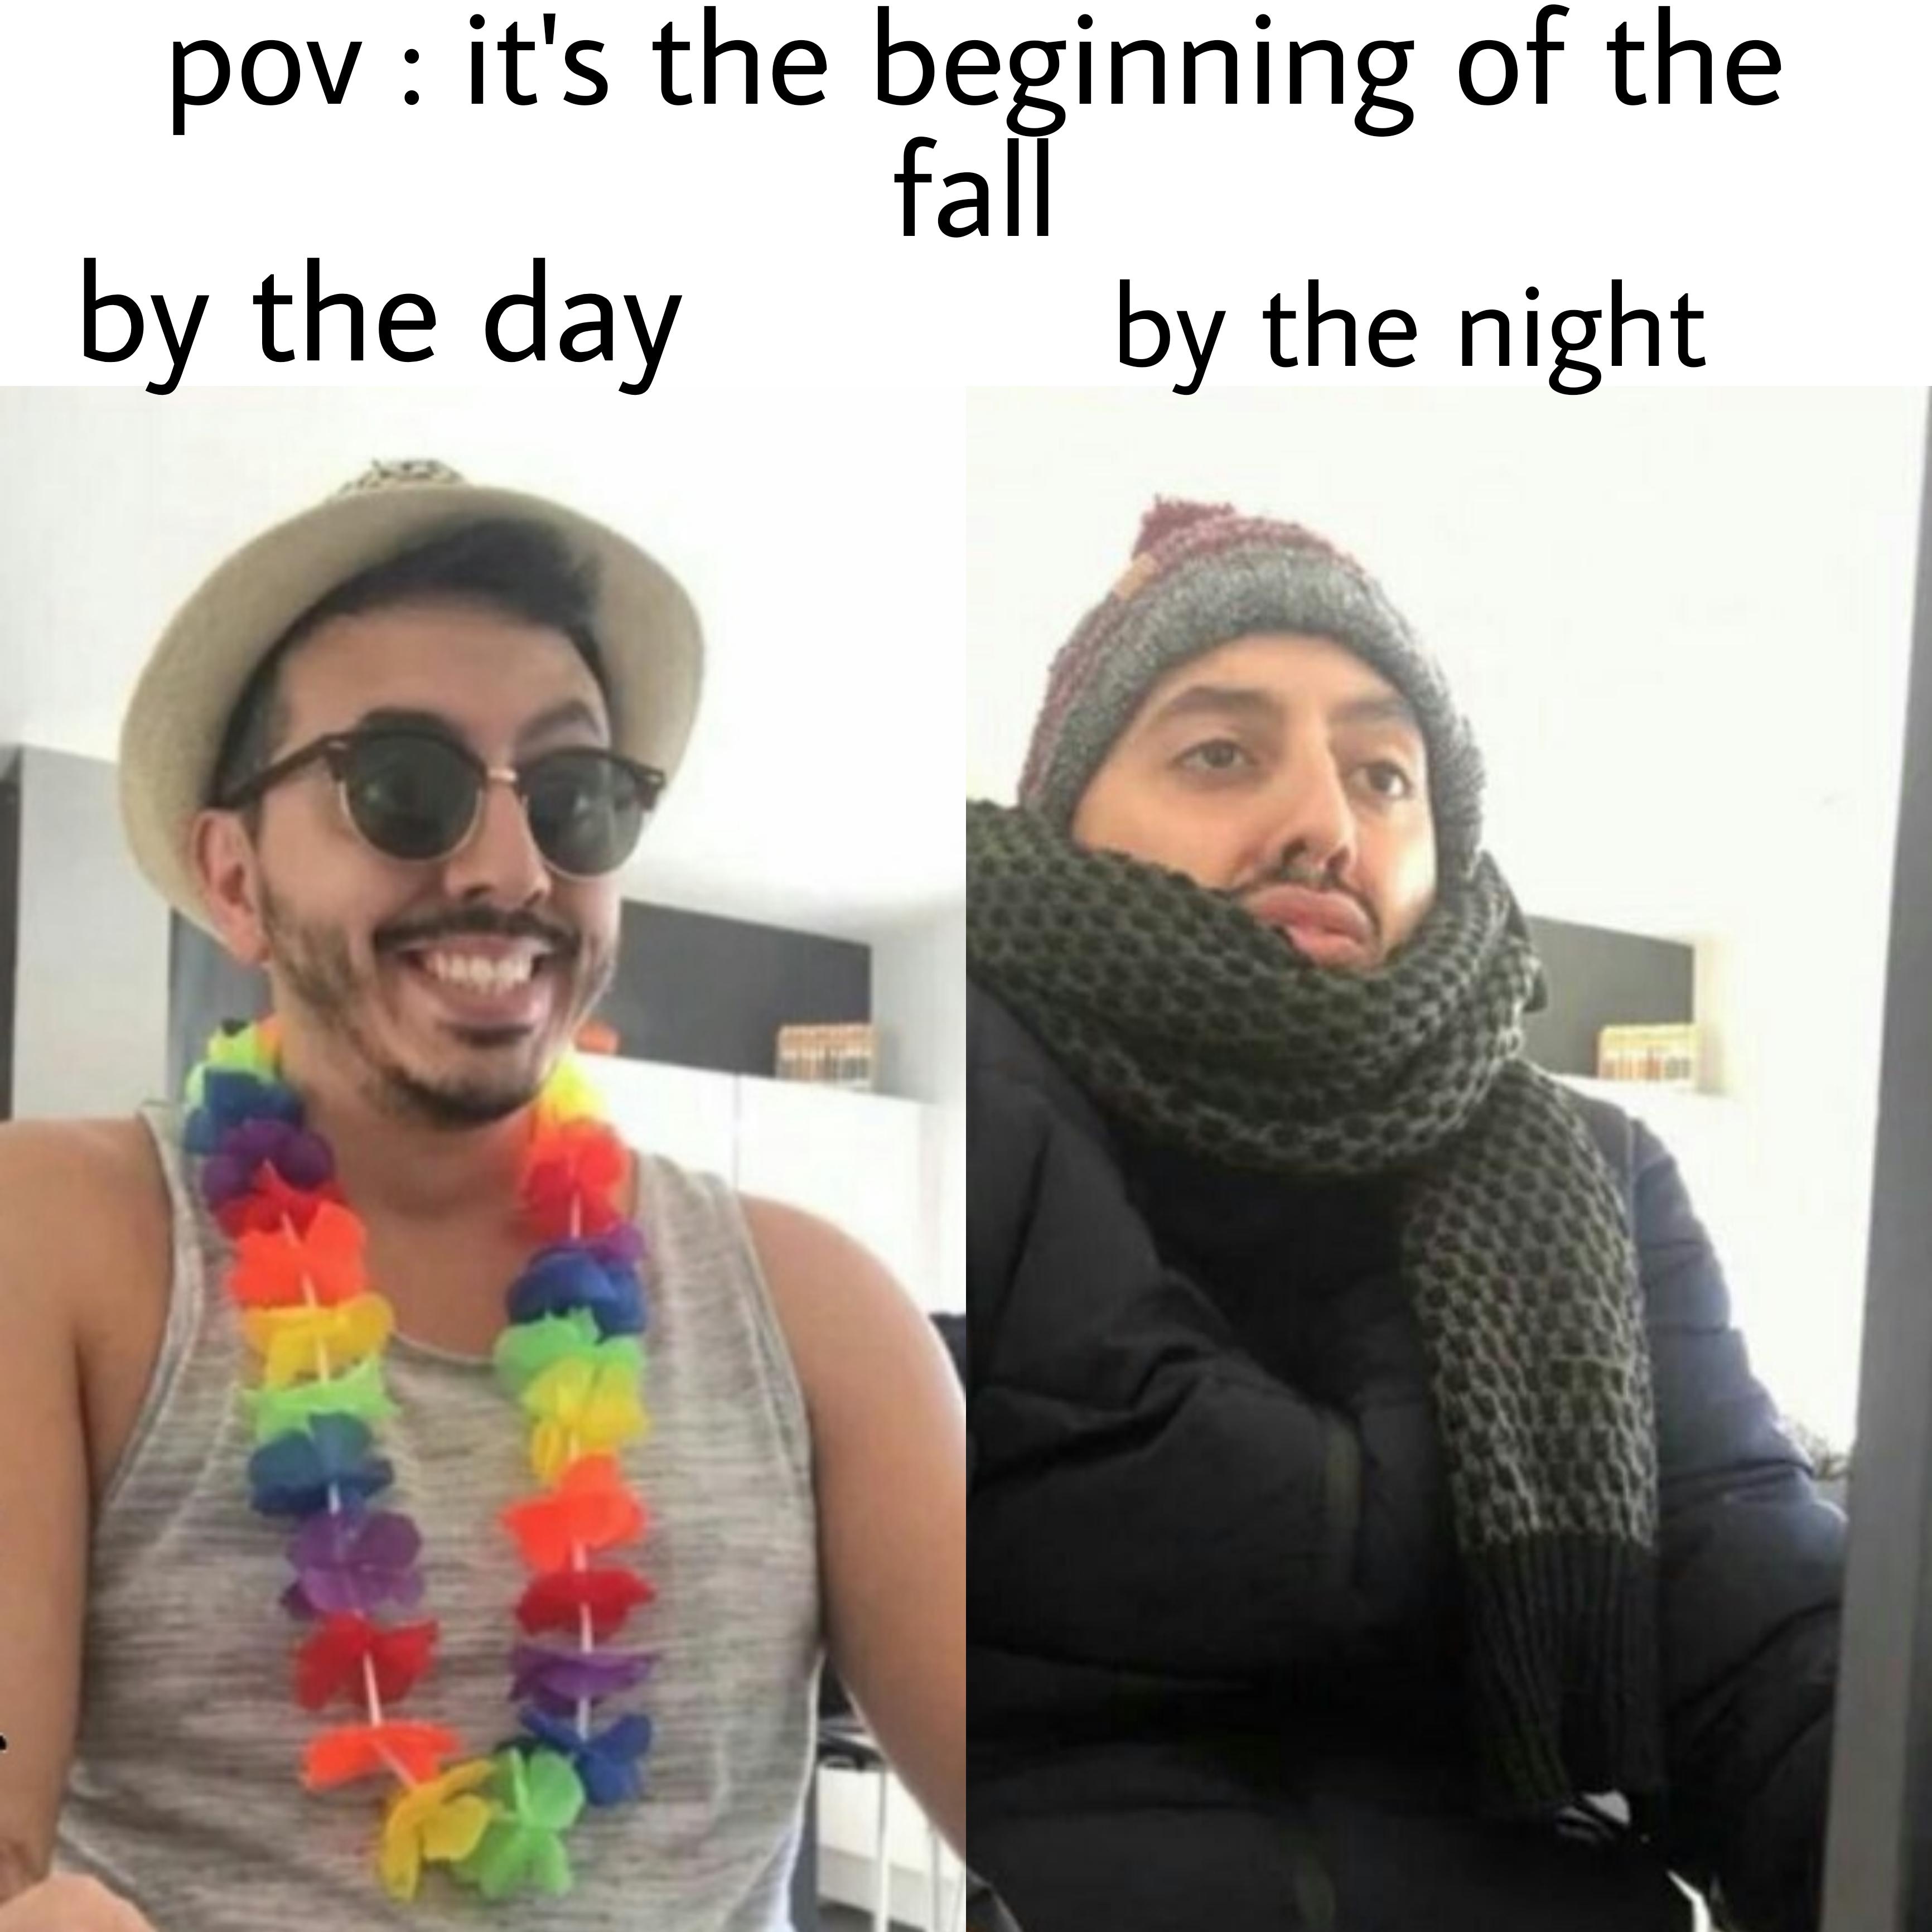 hilarious memes - scarf - pov it's the beginning of the fall by the day by the night